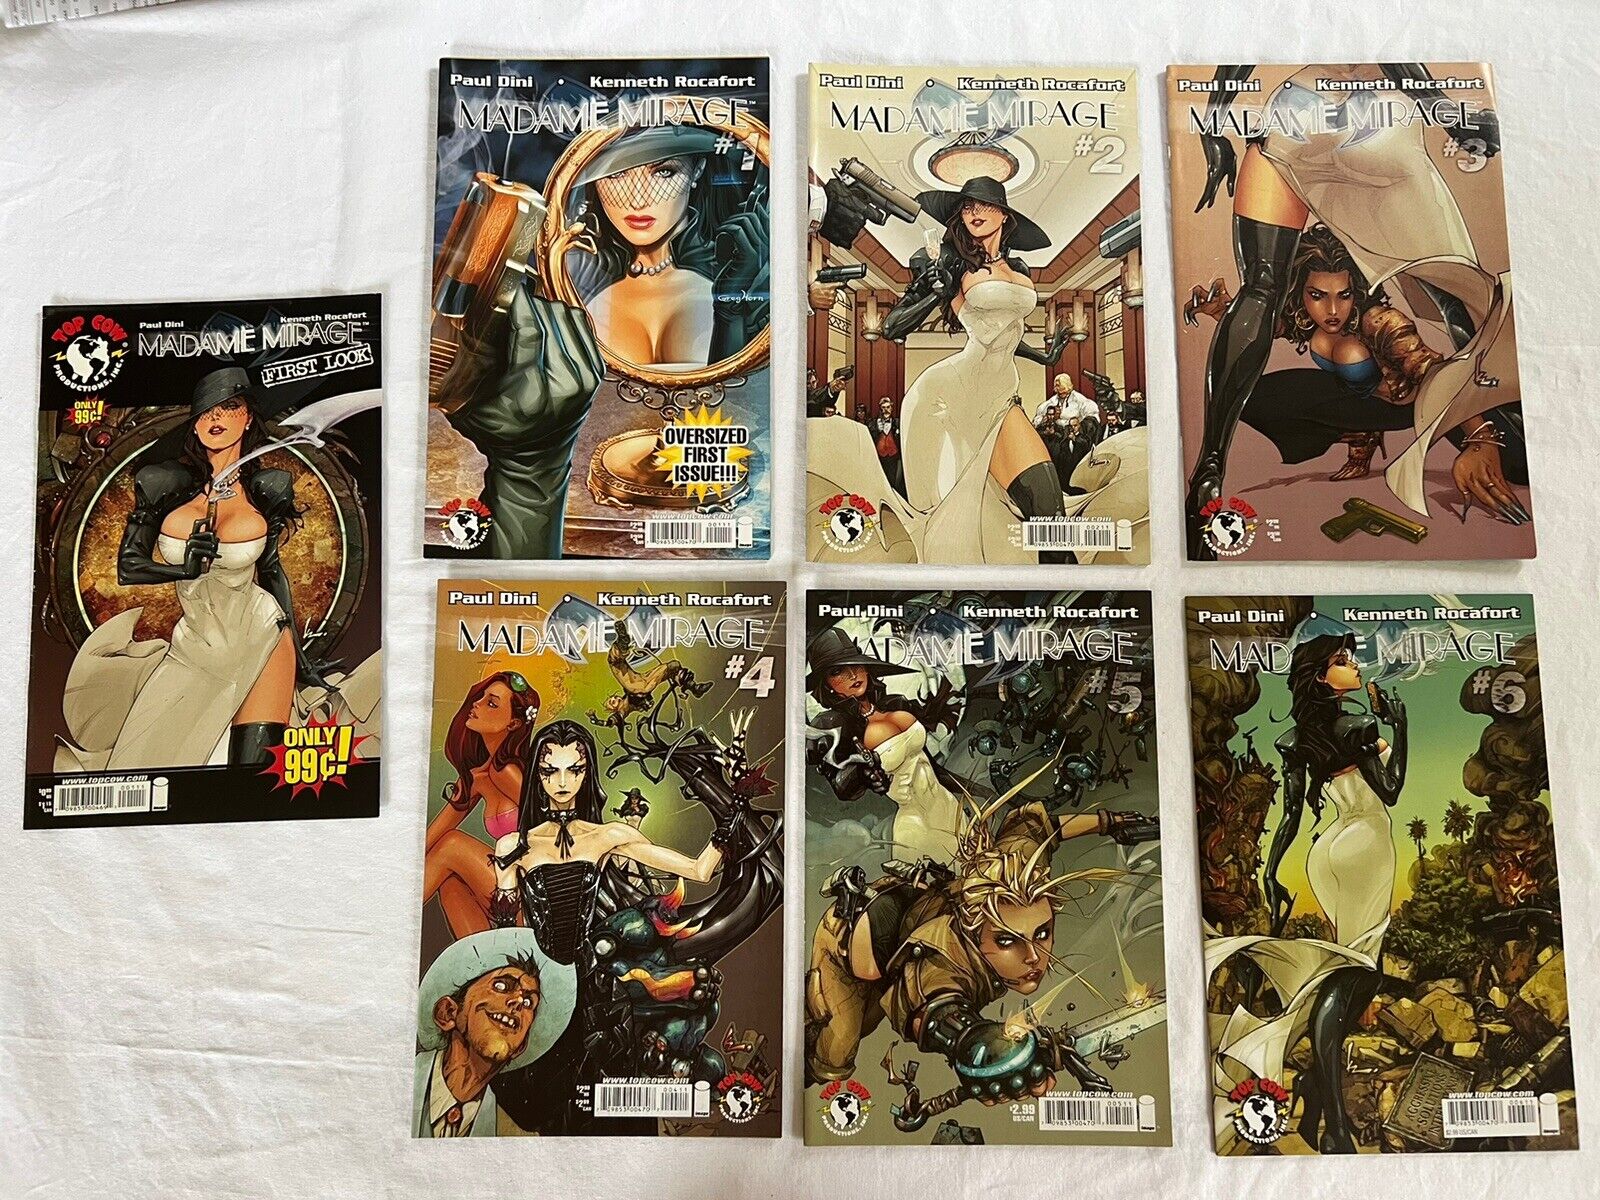 Madame Mirage (Top Cow Productions 2007) Issues #0-#6 Preview Set Run Complete